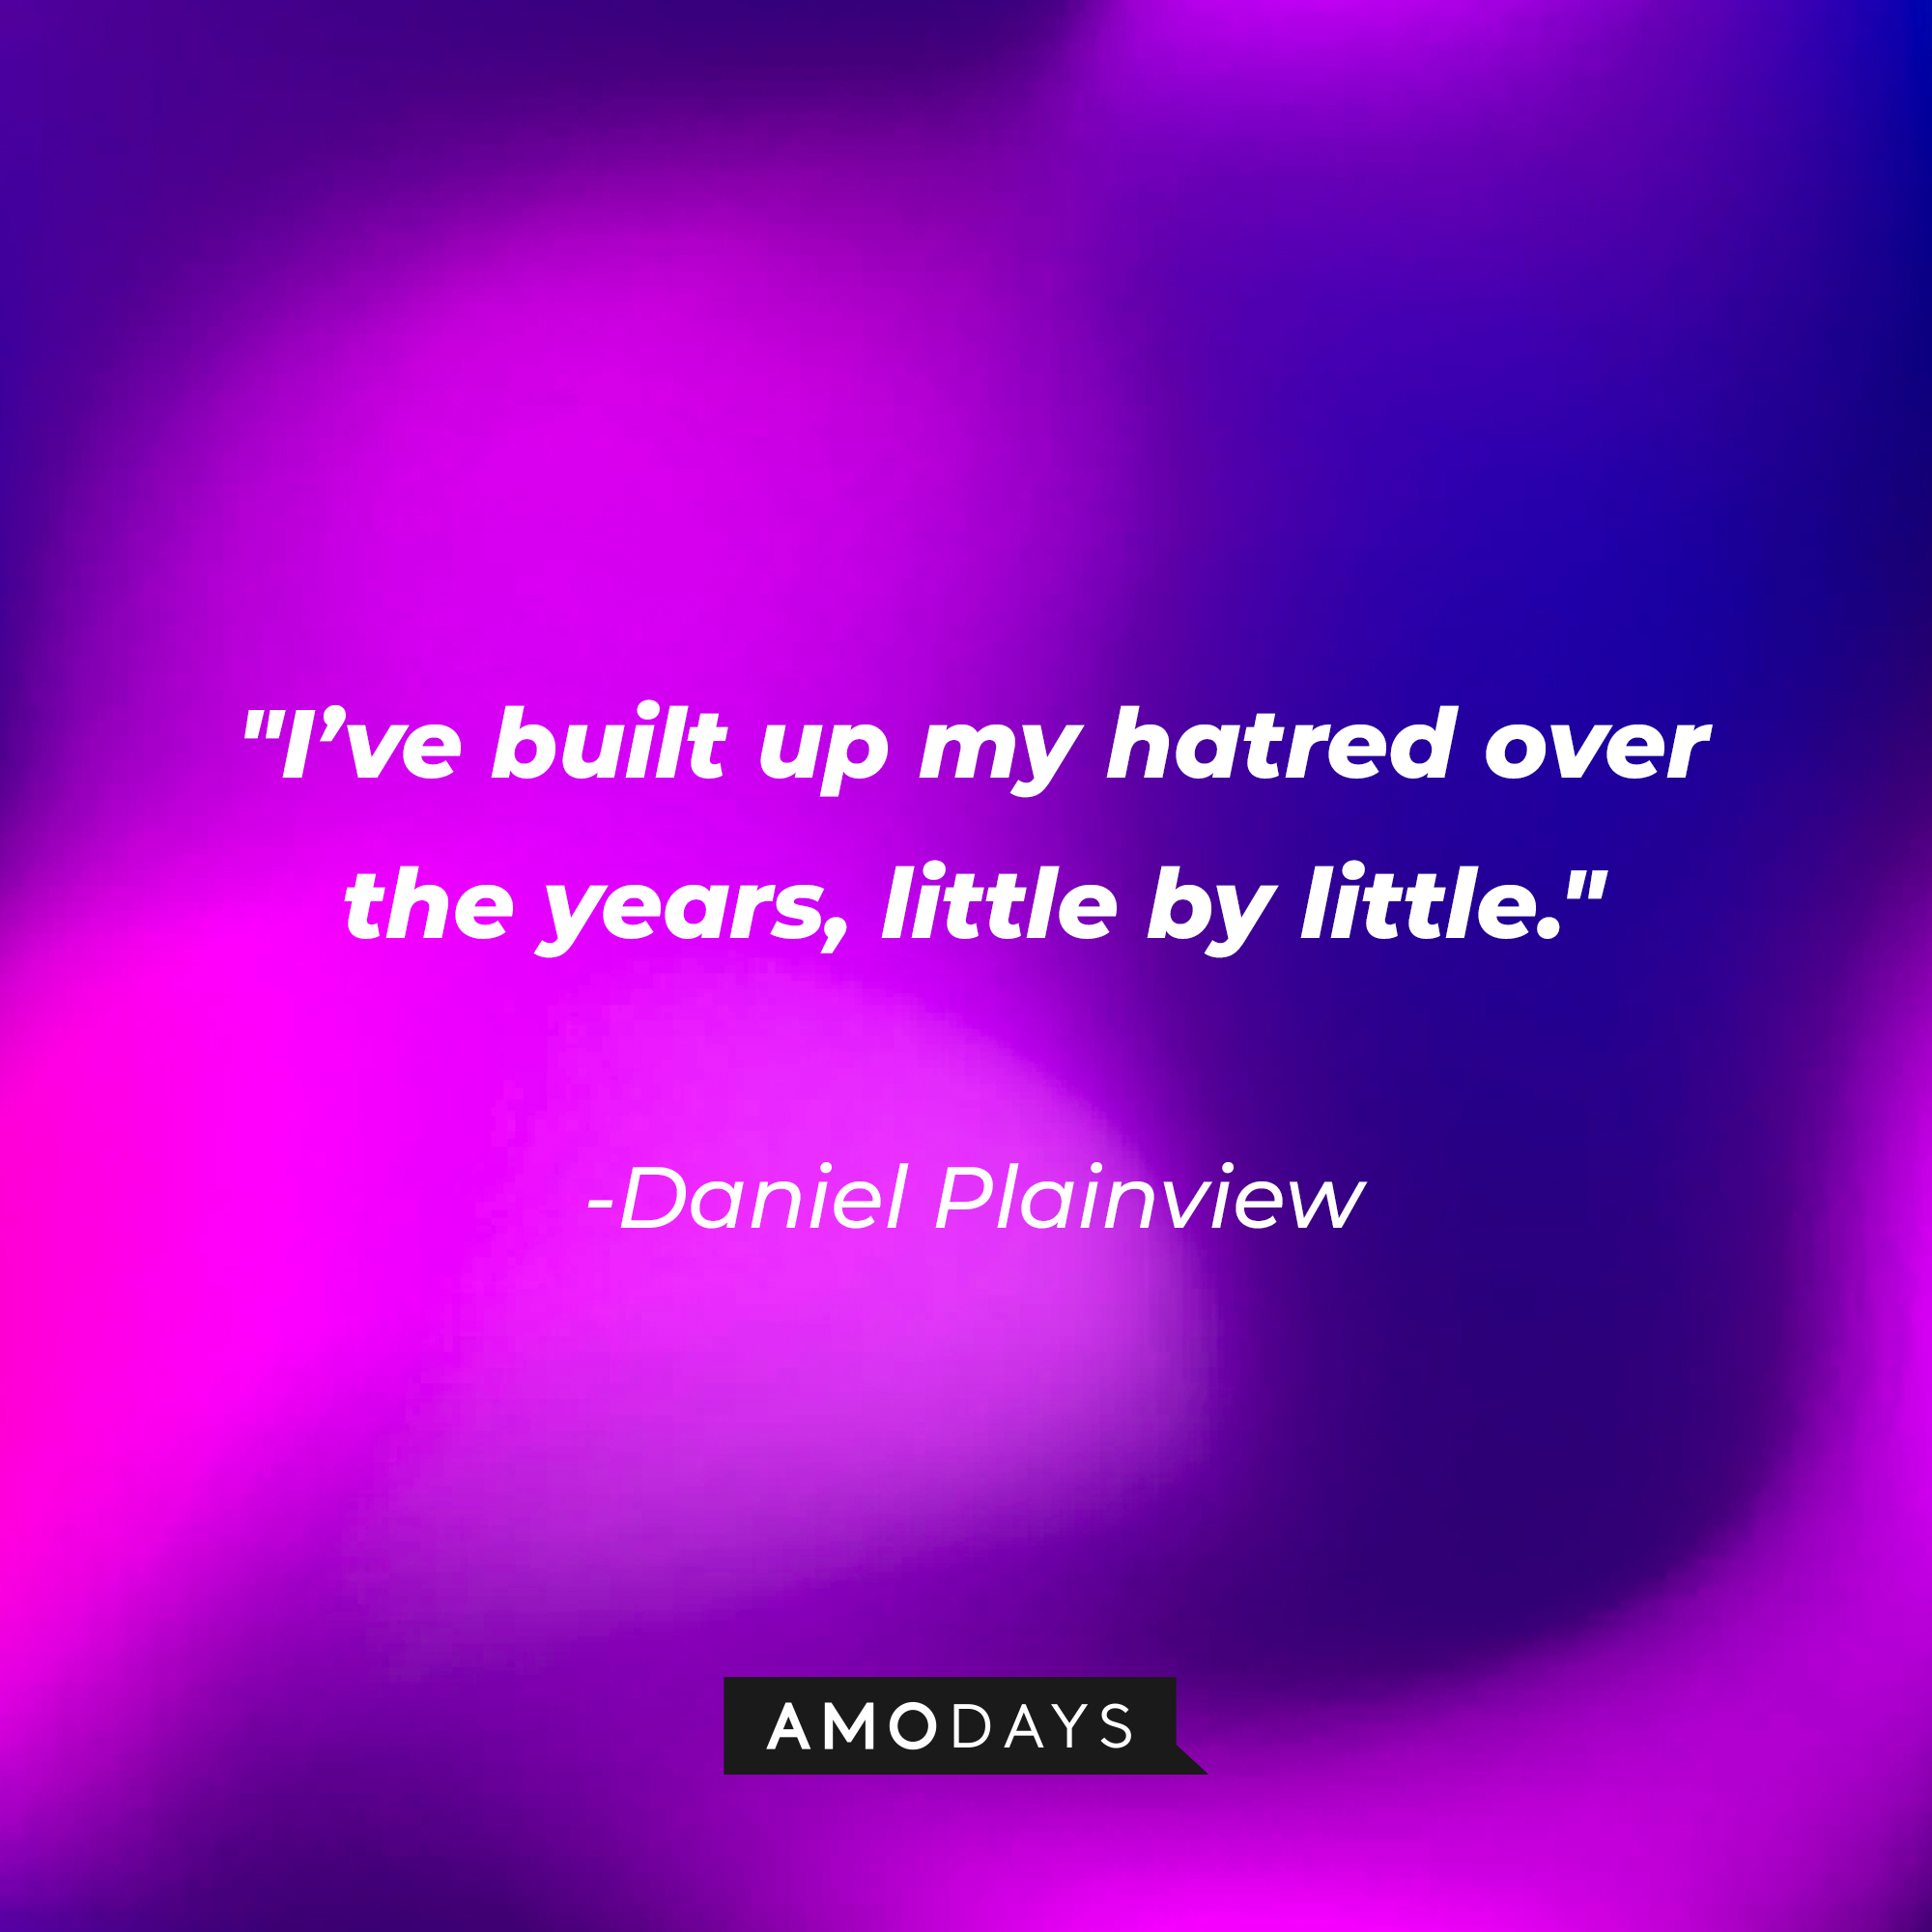 Daniel Plainview’s quote: “I’ve built up my hatred over the years, little by little." | Source: AmoDays